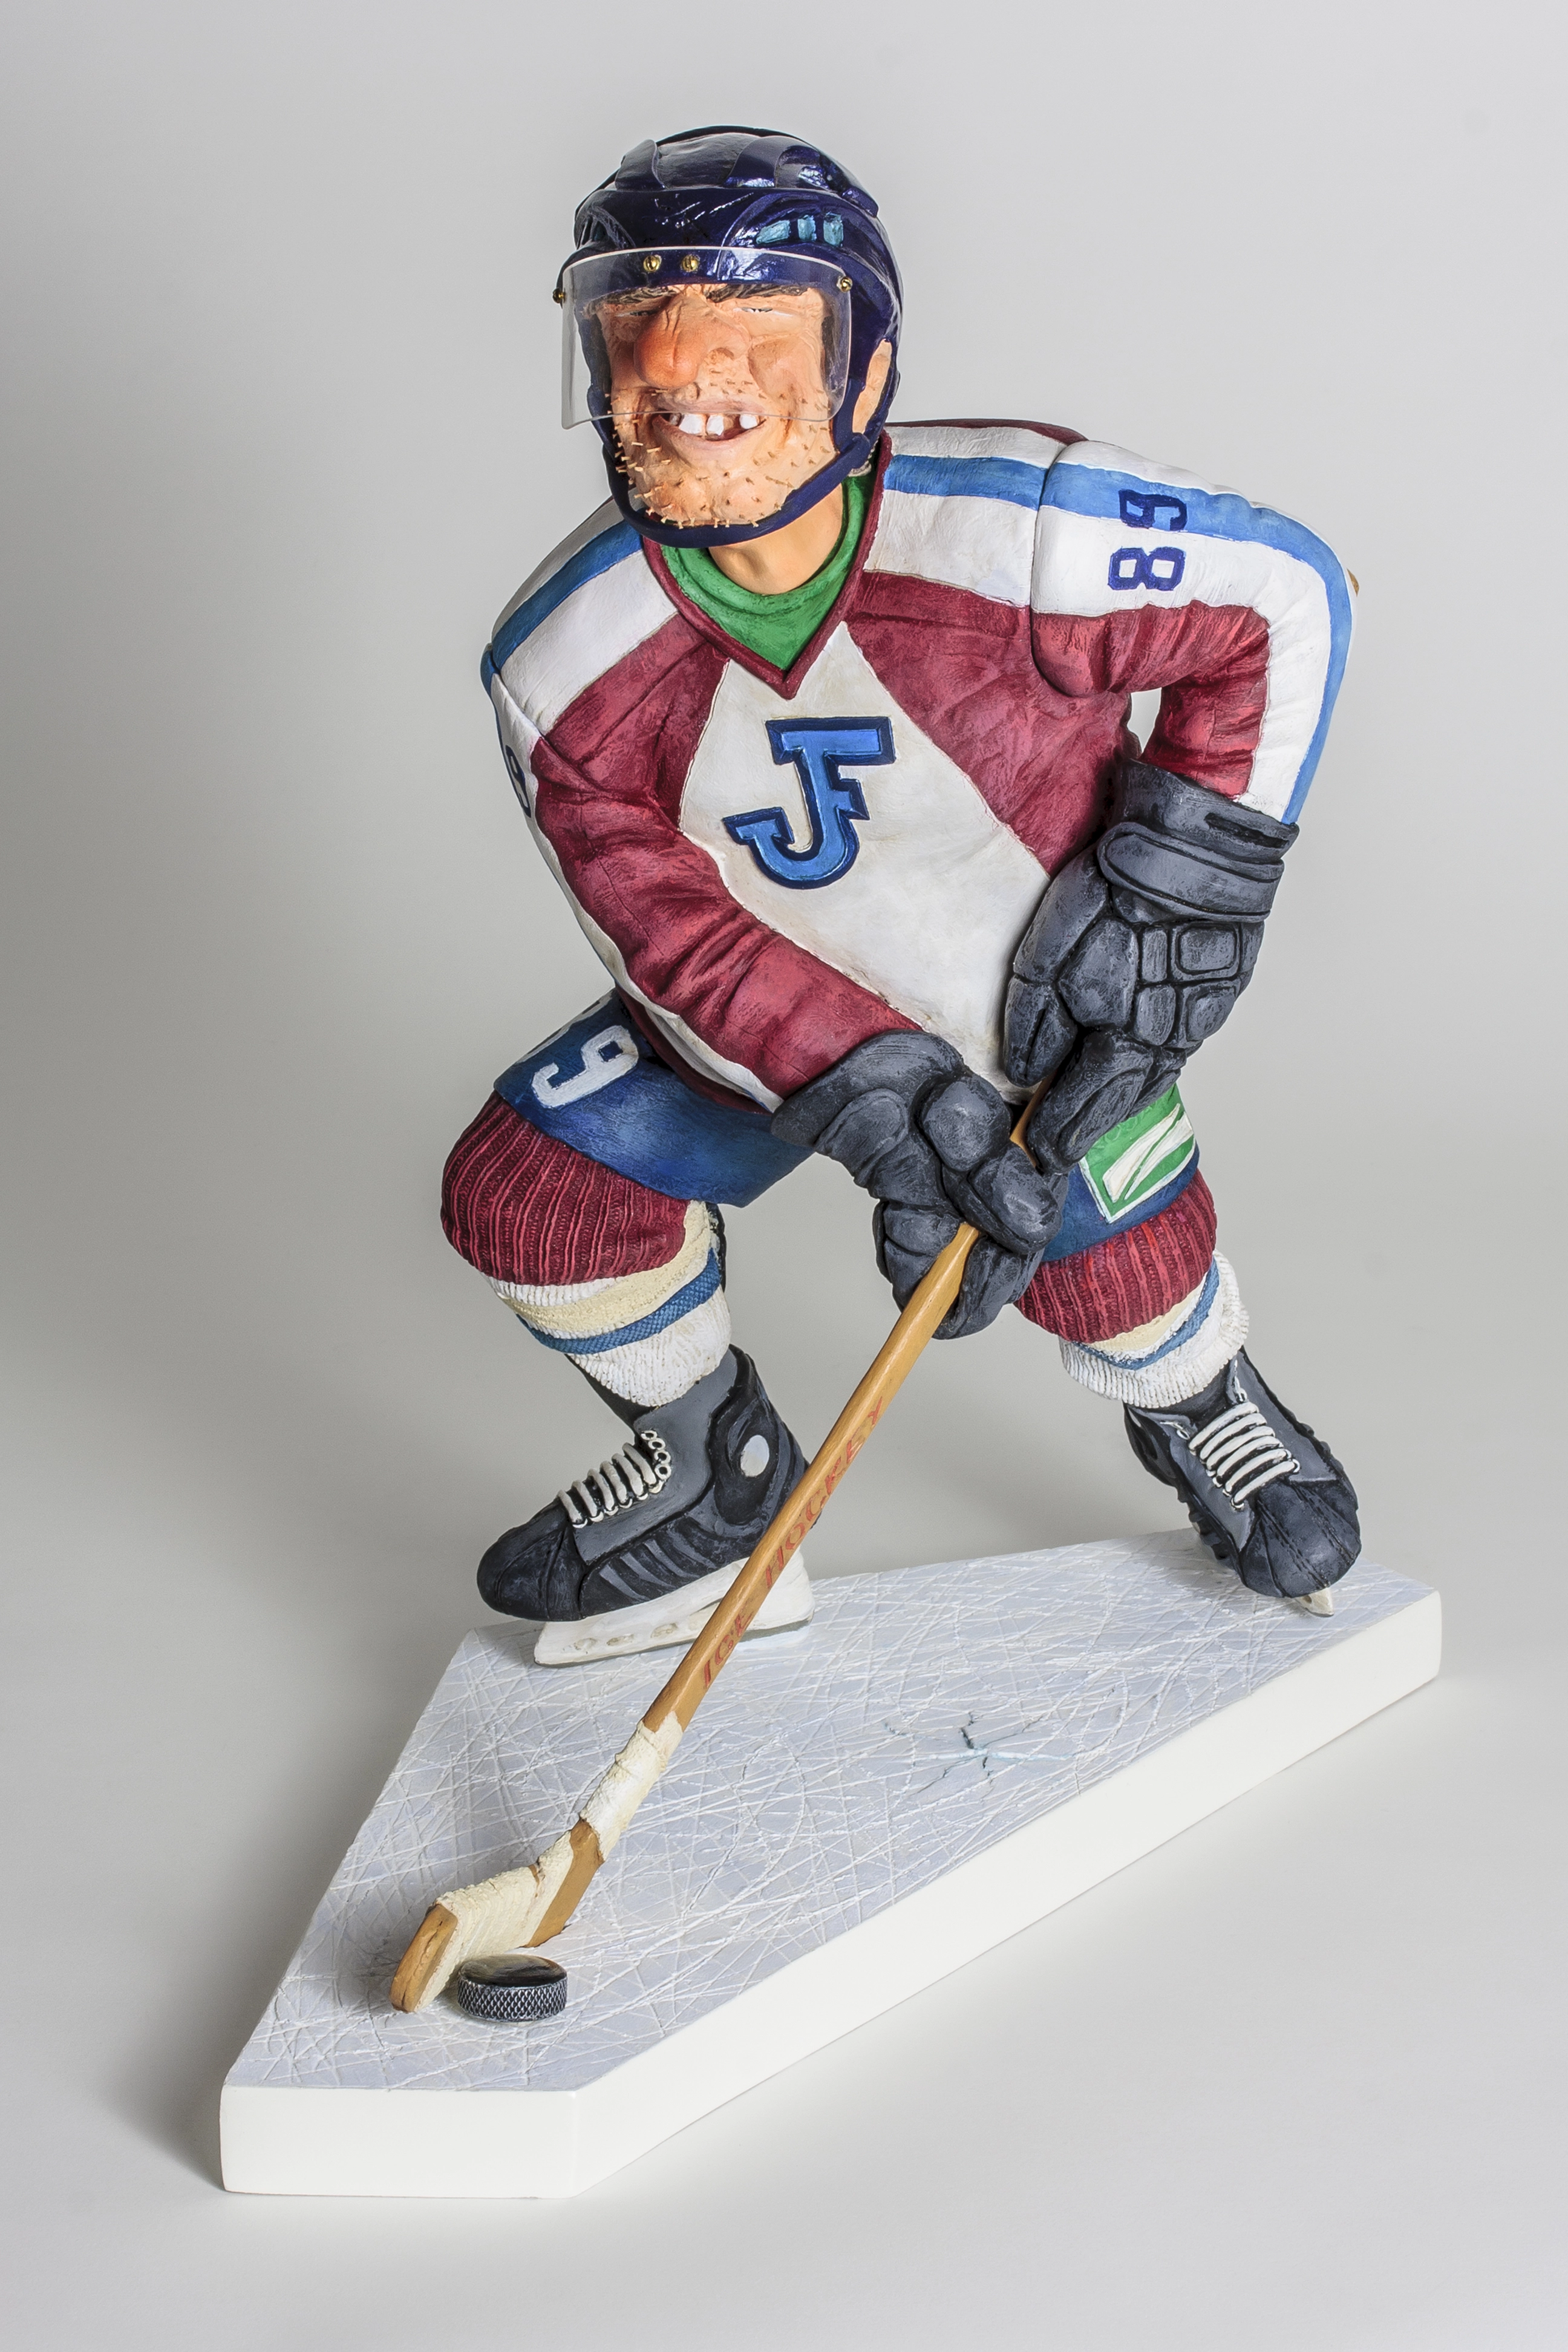 Guillermo Forchino THE ICE HOCKEY PLAYER Comical Art Sculpture